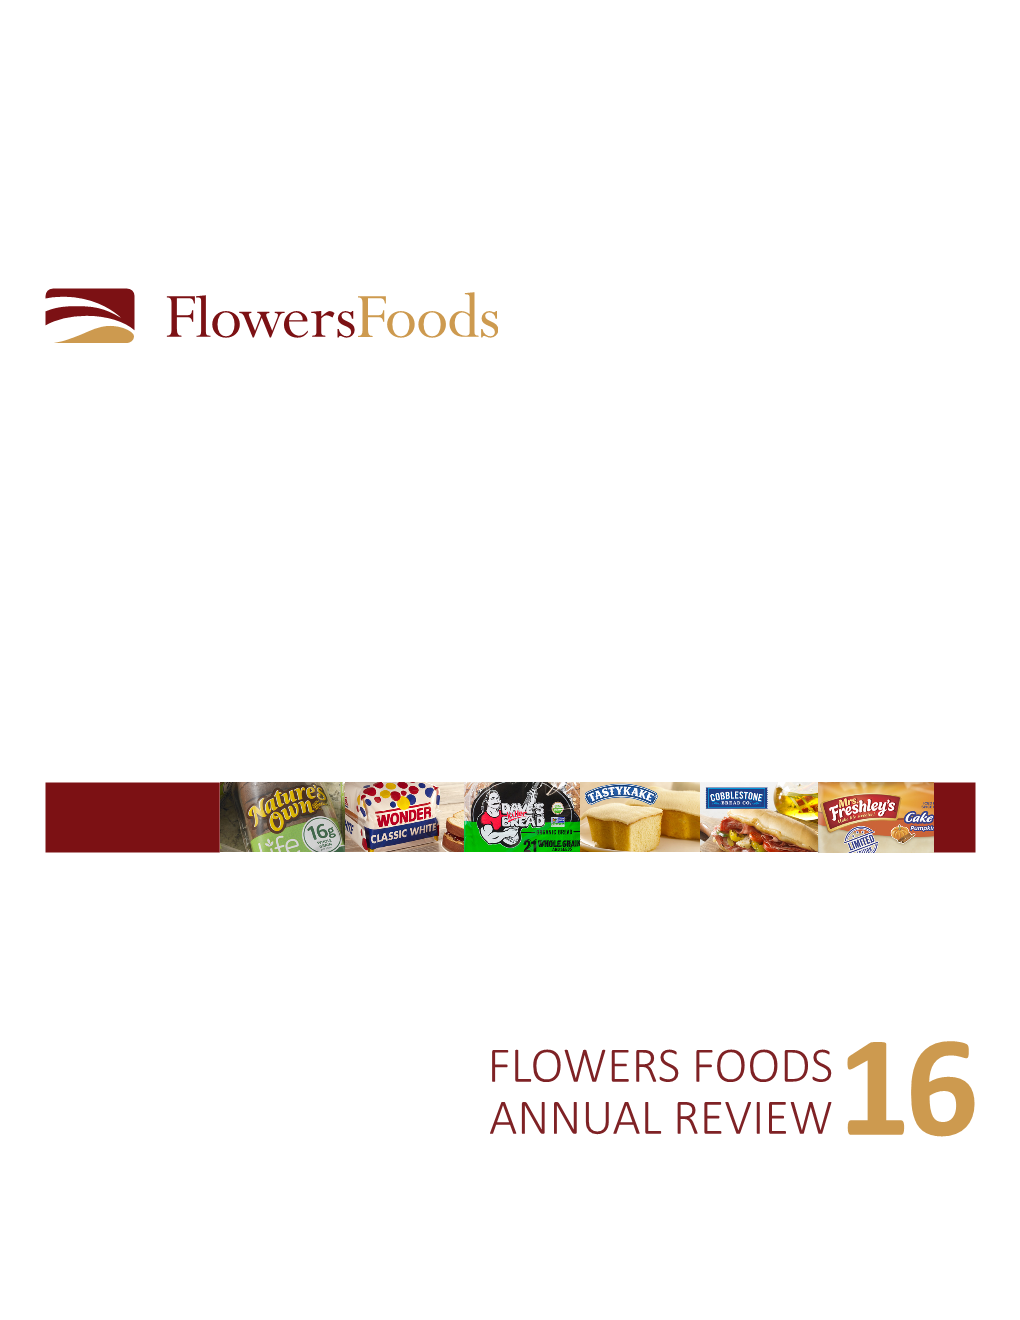 Flowers Foods Annual Review16